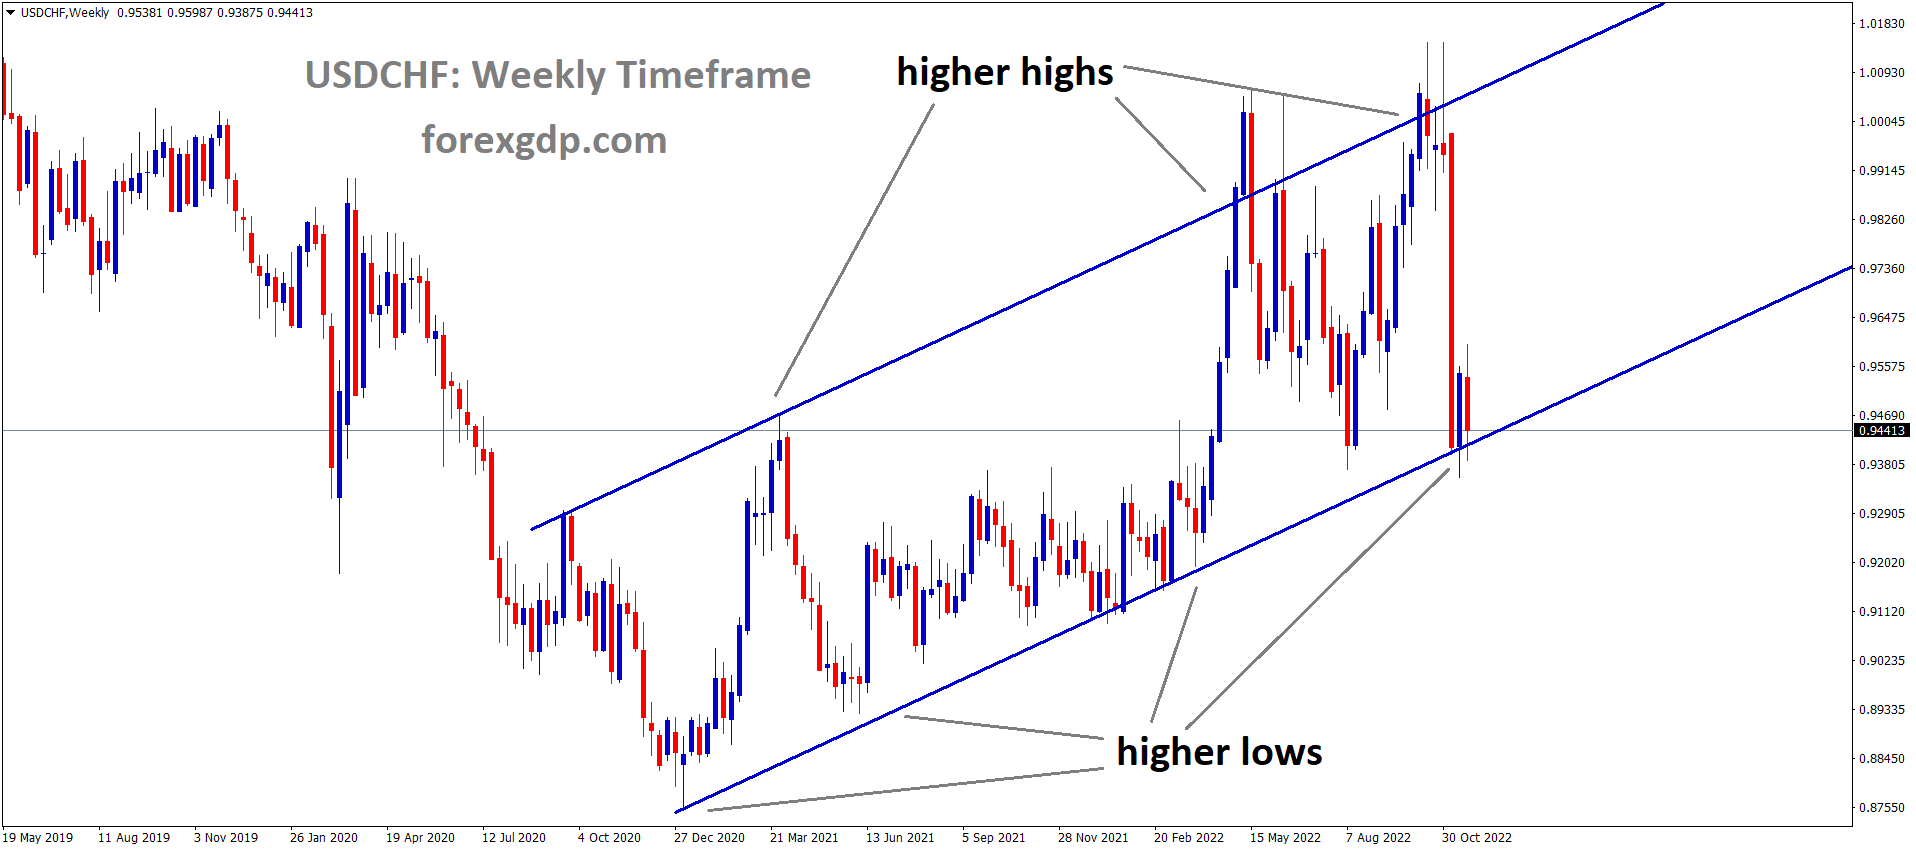 USDCHF is moving in an Ascending channel and the market has reached the higher low area of the channel 4